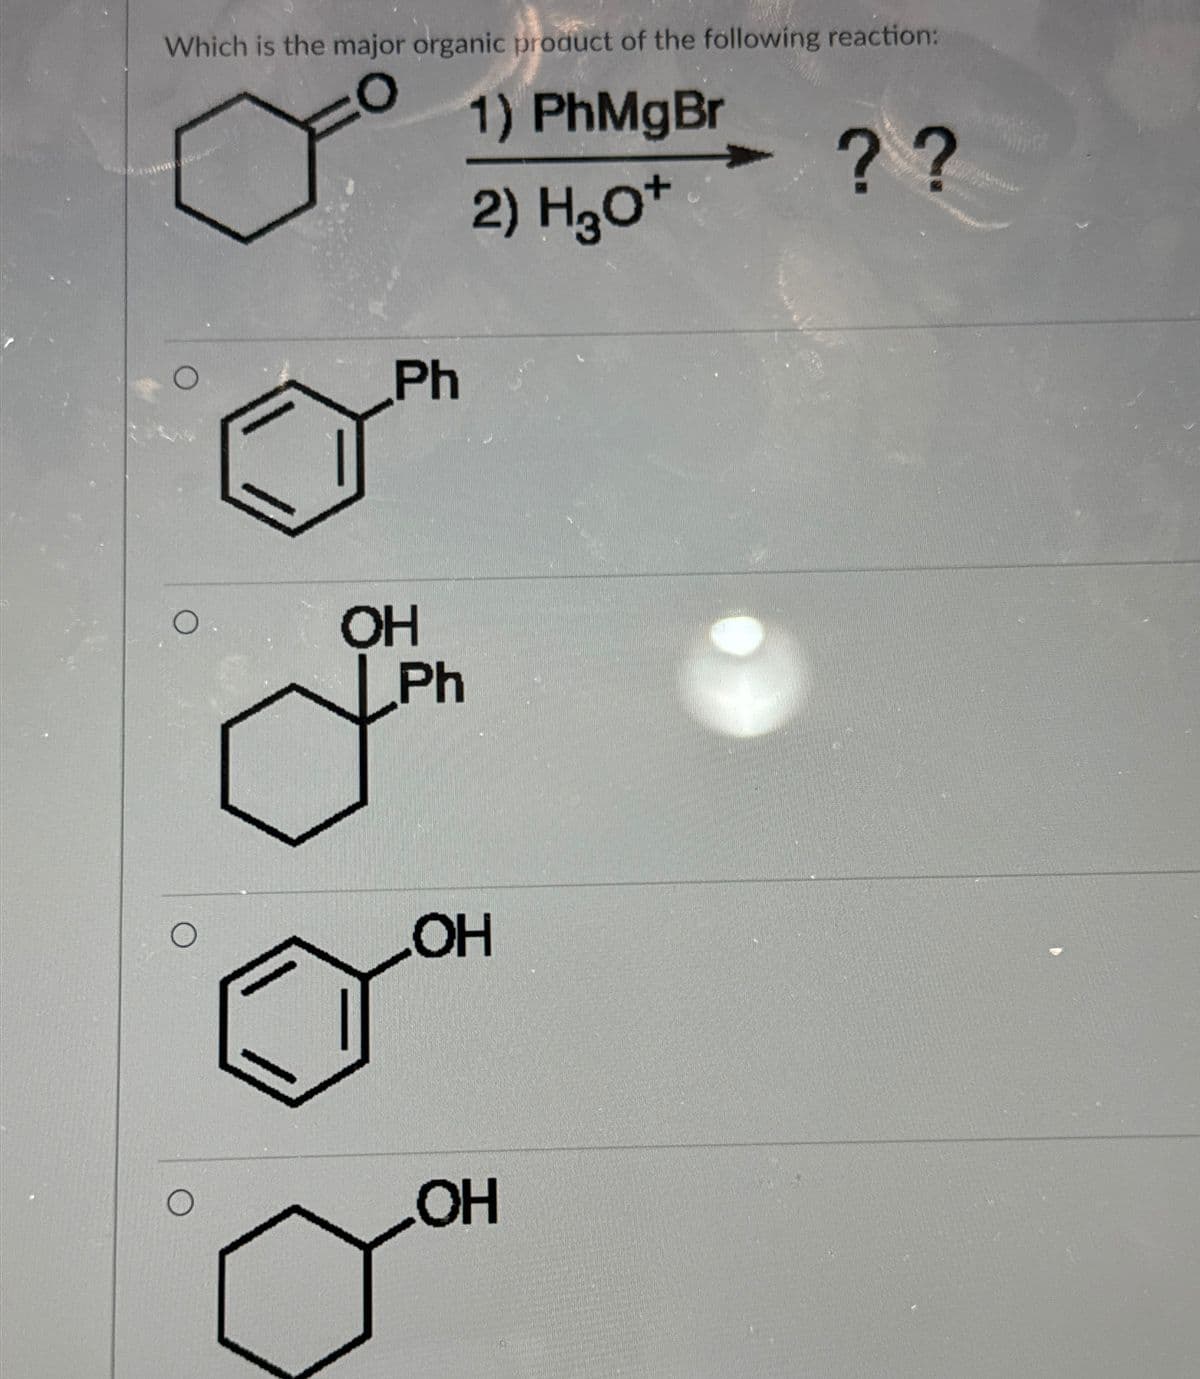 Which is the major organic product of the following reaction:
1) PhMgBr
2) H3O+
O
Ph
OH
Ph
OH
OH
??